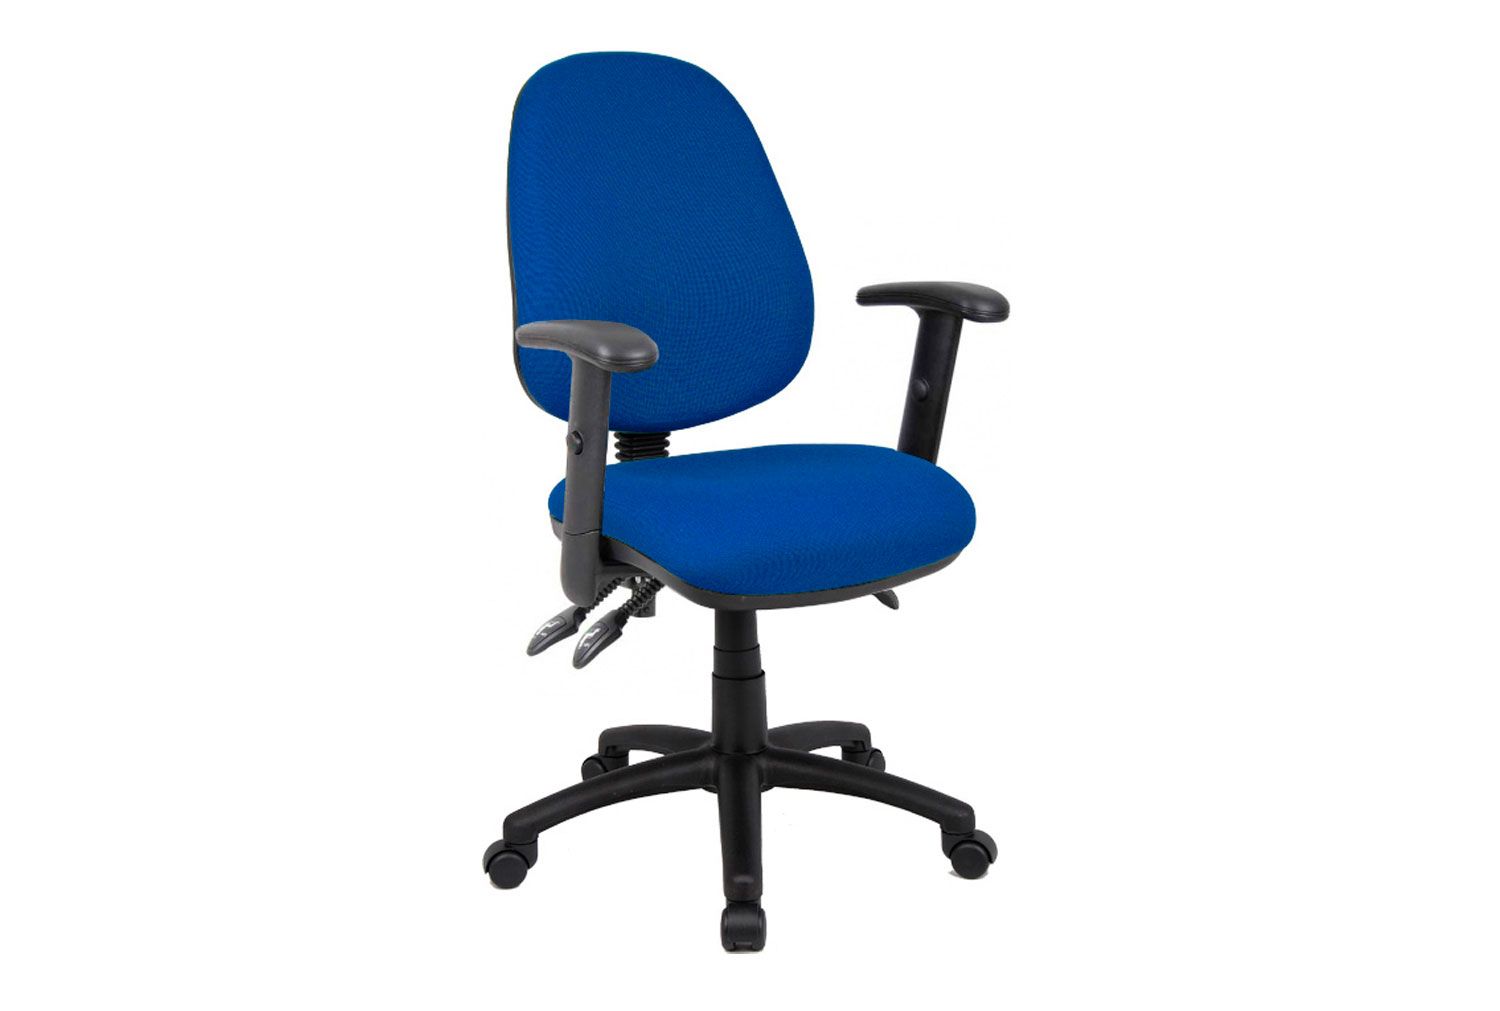 Kendall 3 Lever High Back Operator Office Chair, With Adjustable Arms, Blue, Fully Installed